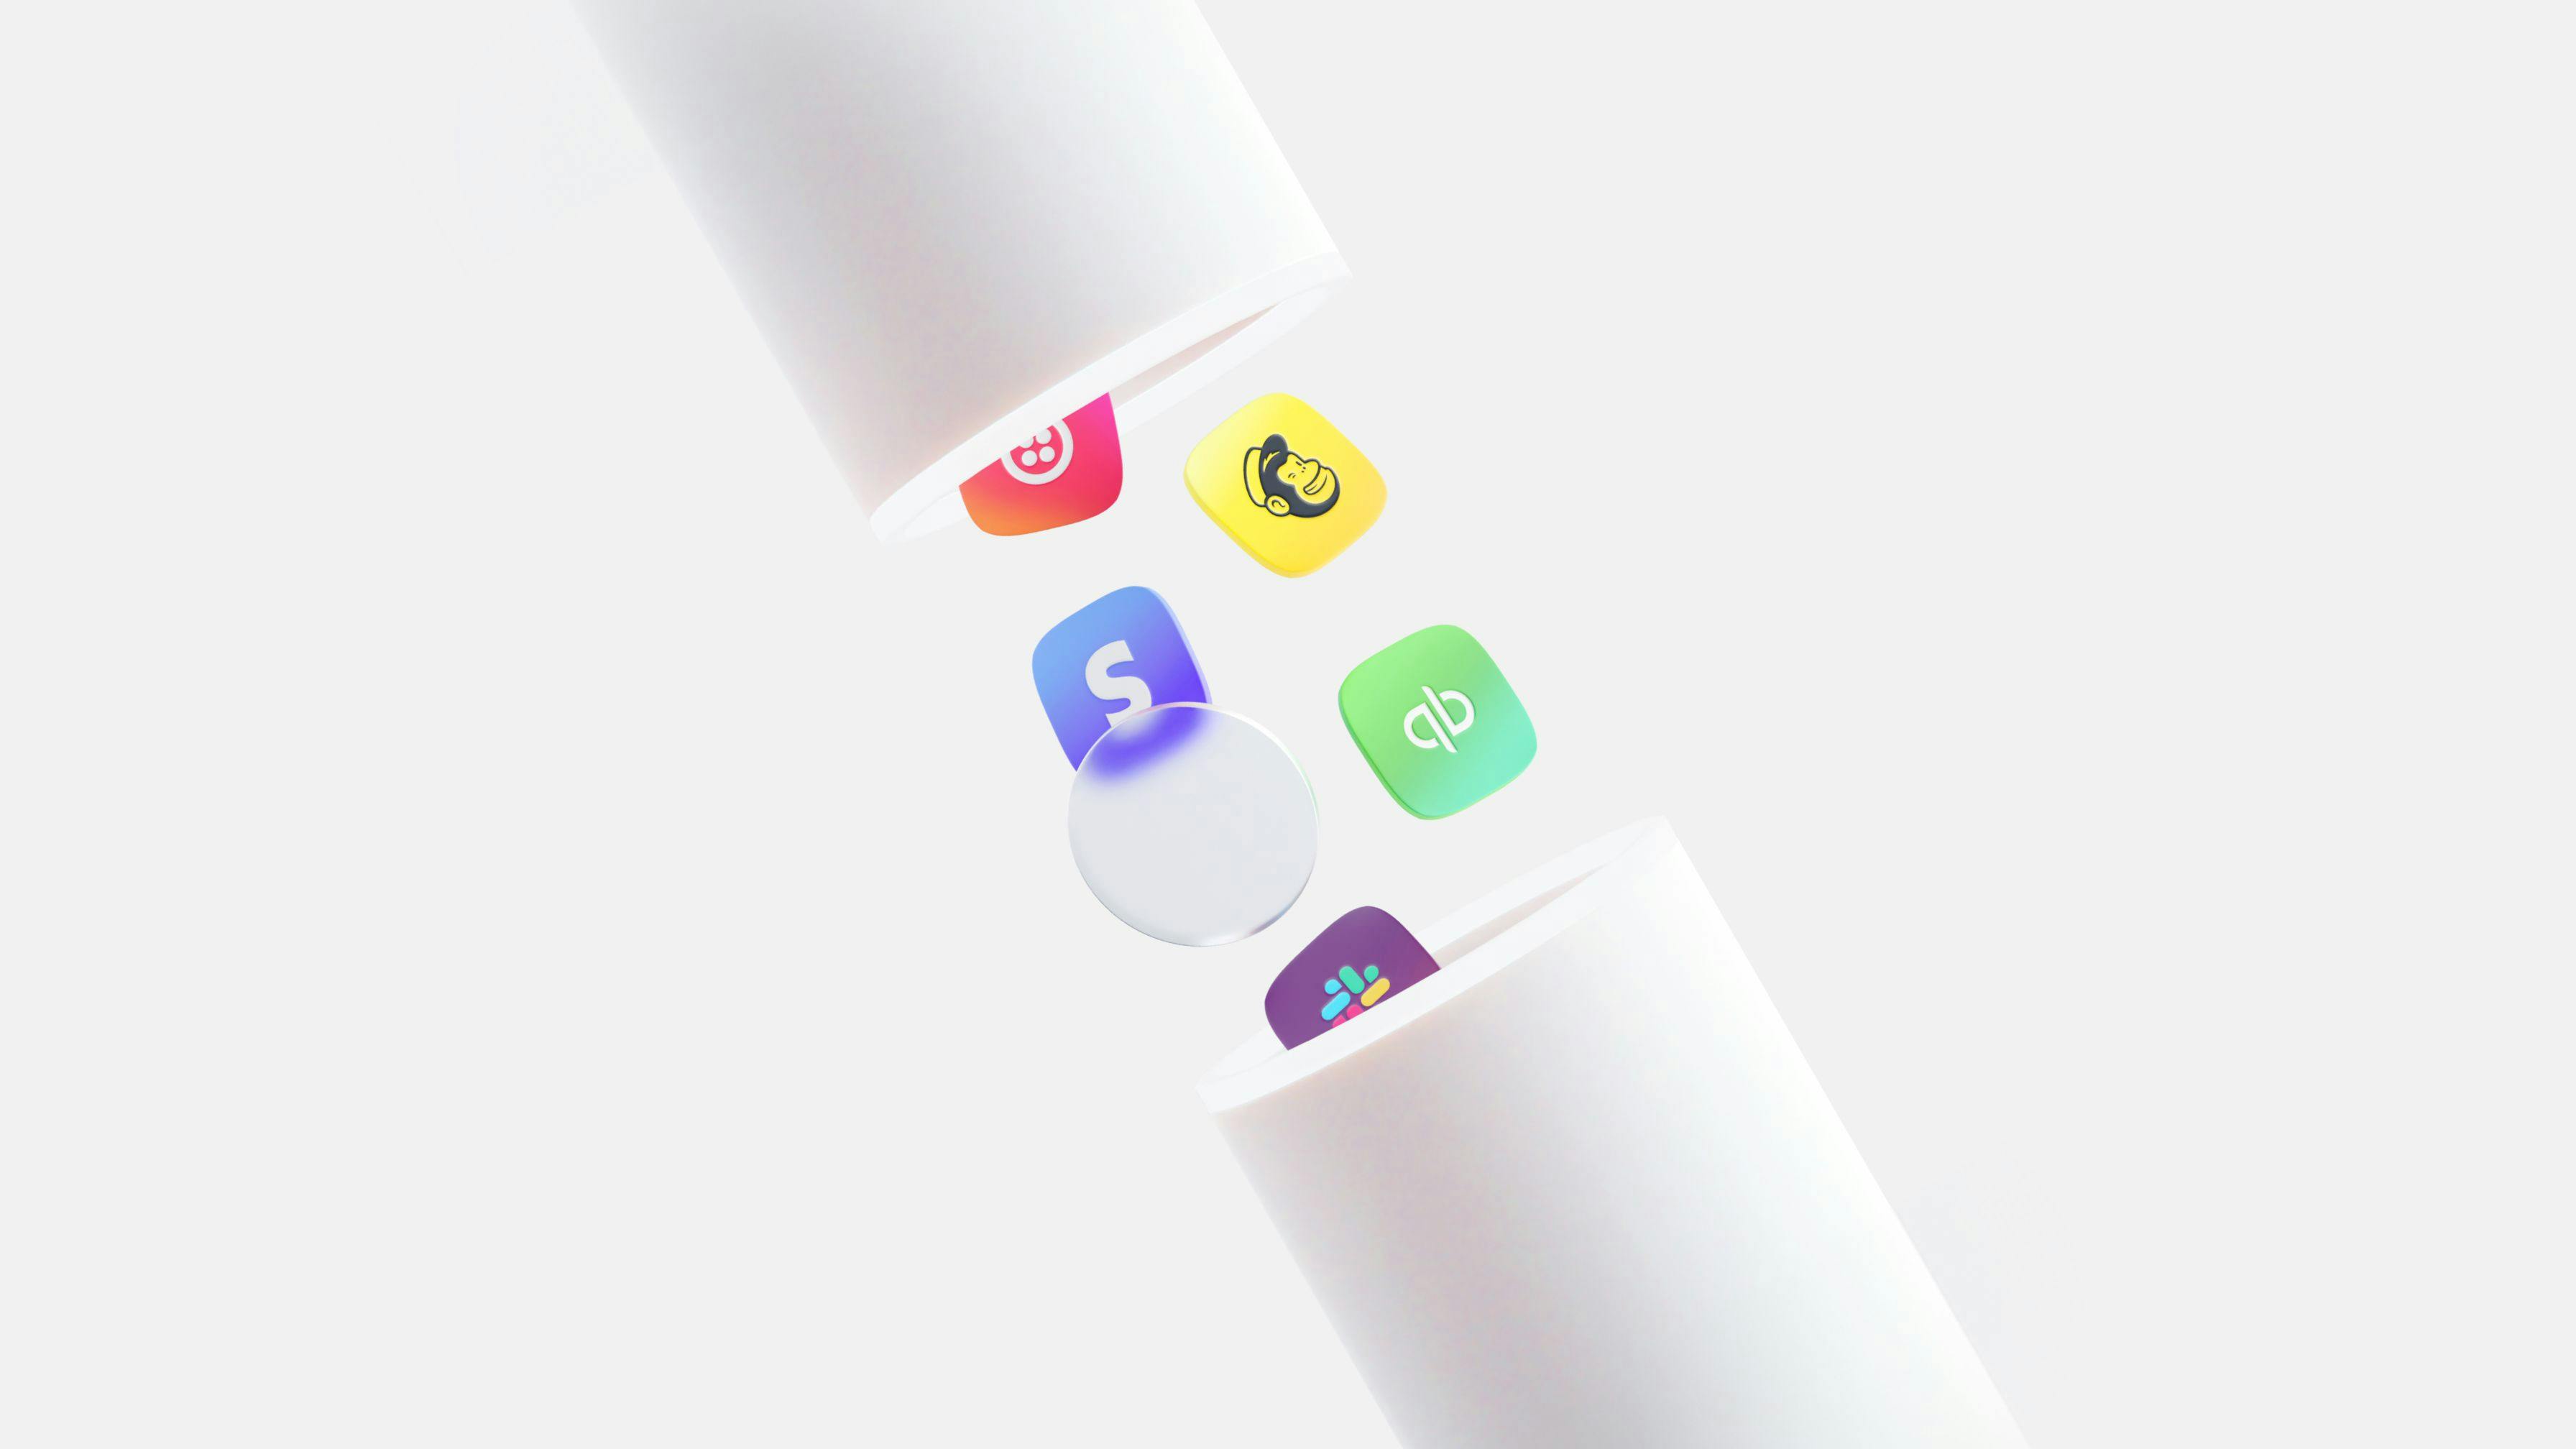 3D illustration showing app icons fly through a pipe